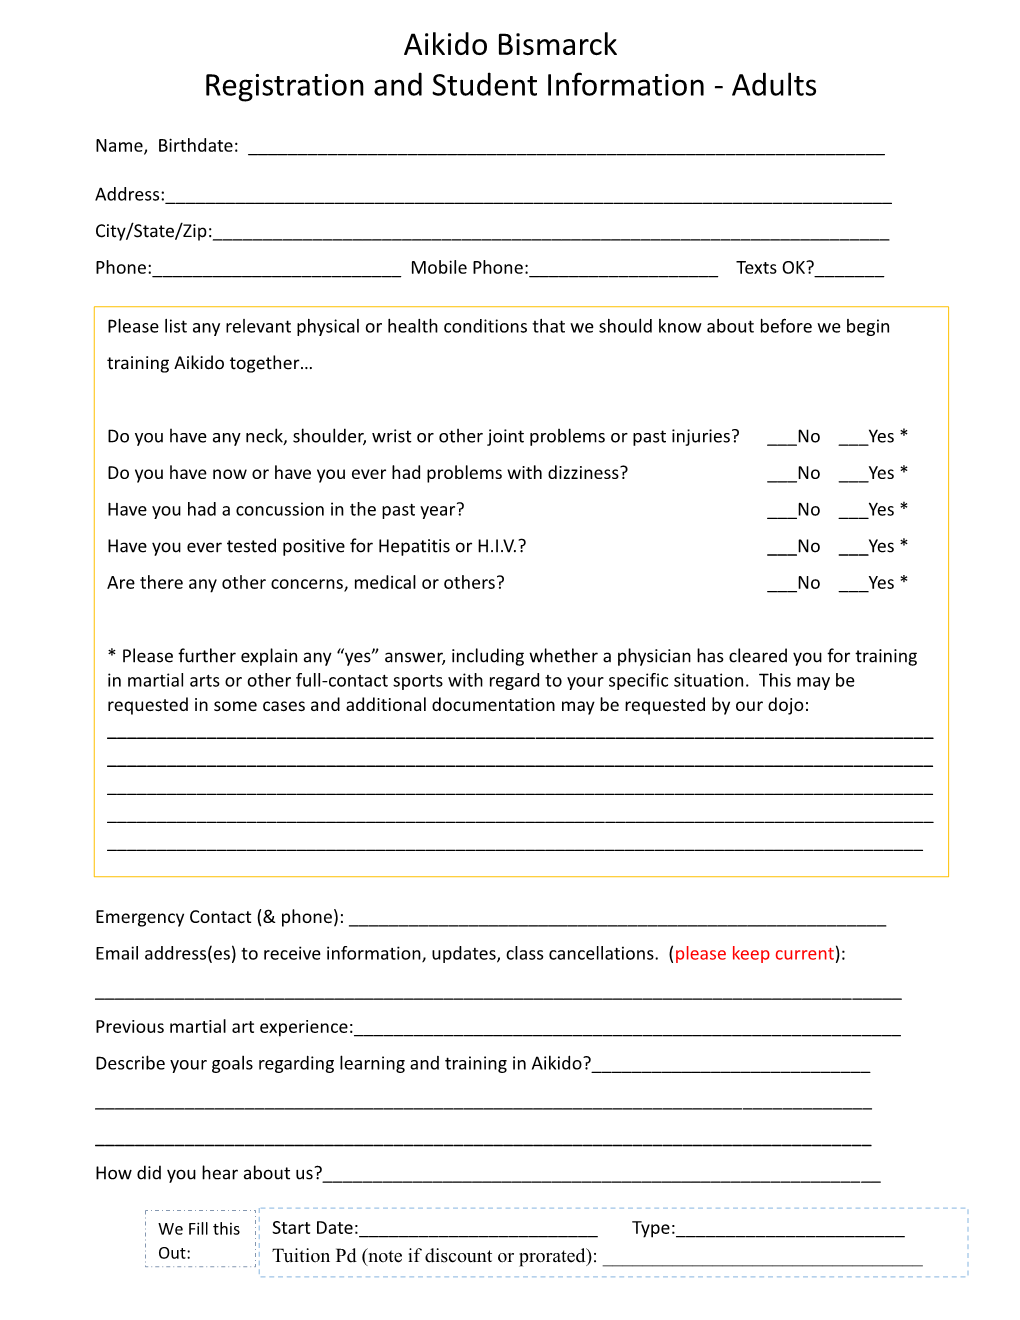 New ADULT Student Registration Packet